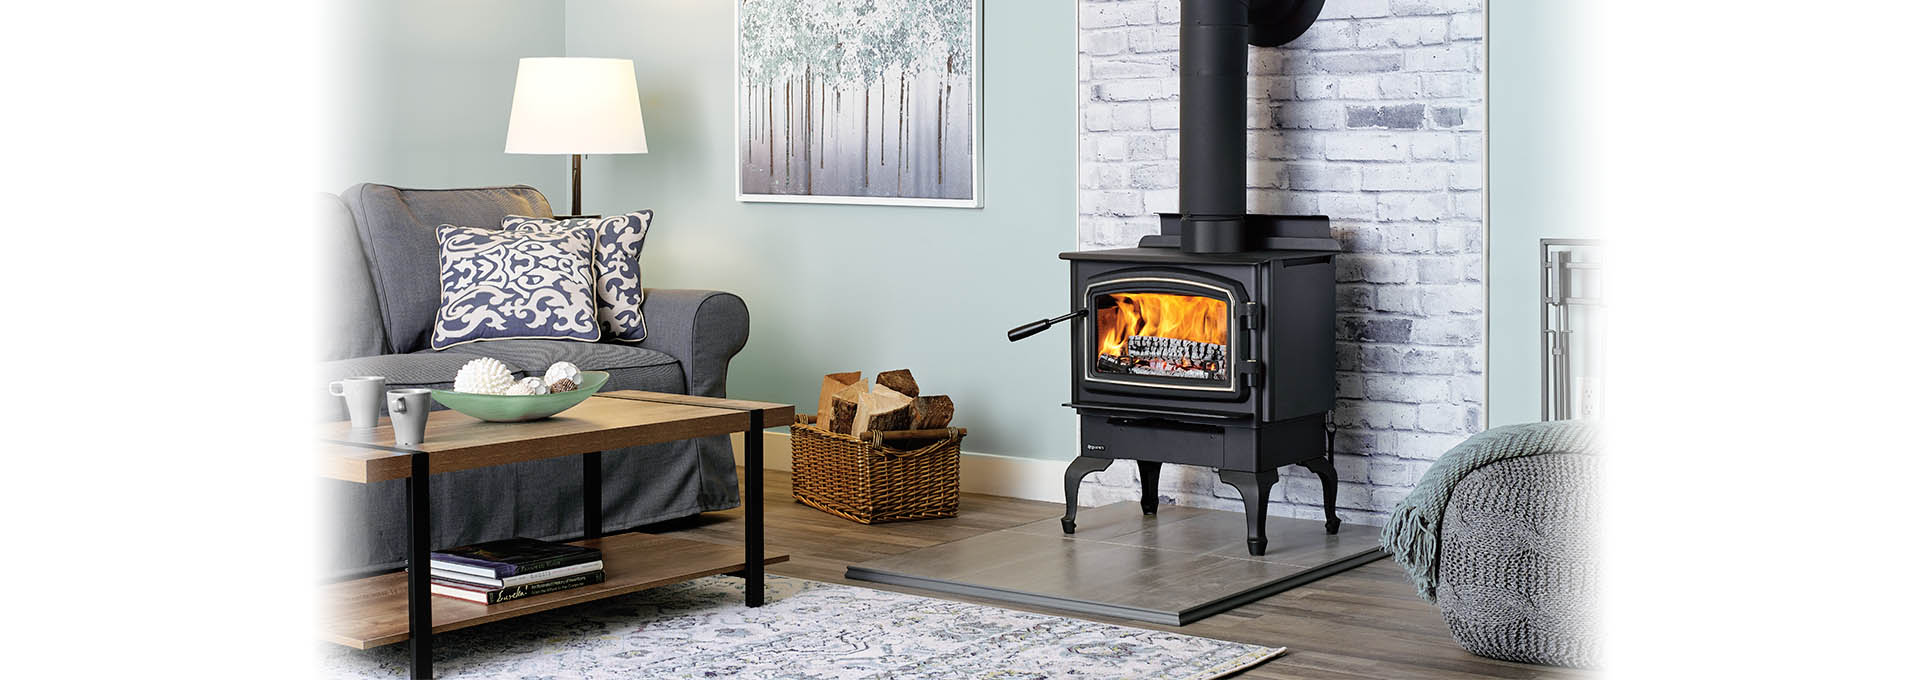 F1150 Non-Catalytic Wood Stove  Freestanding Wood Stoves by Regency